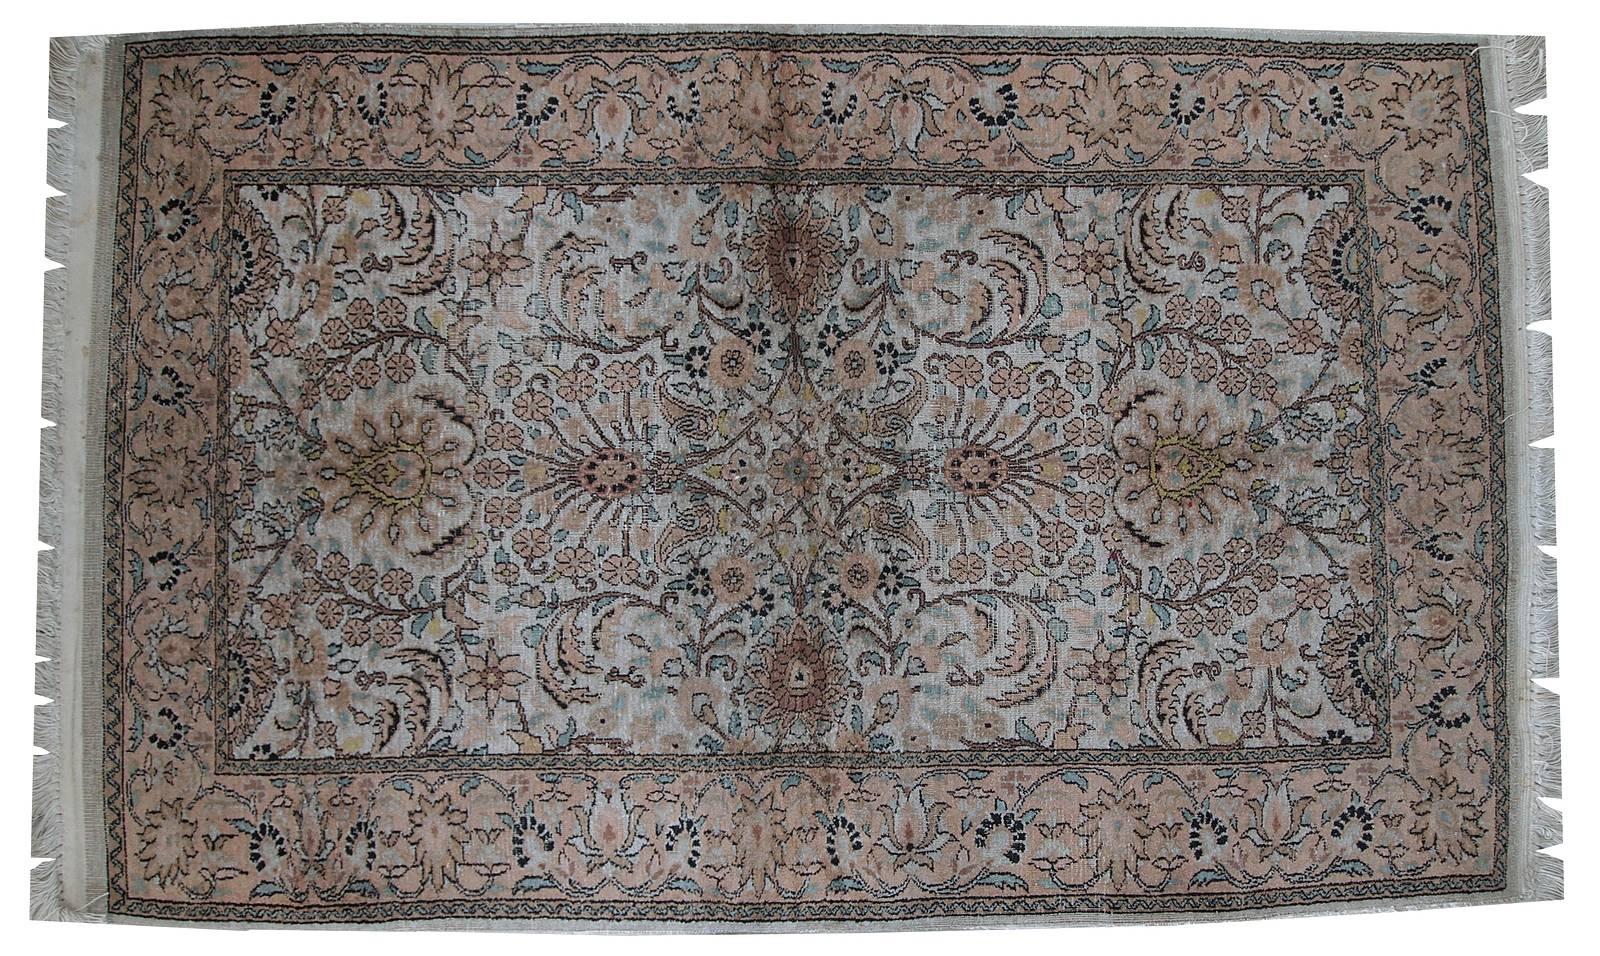 Vintage silk Indo-Tabriz rug in original condition. This is Indian rug made in Persian style of Tabriz city. Very soft shades of beige and peach are on the rug. The design is busy, floral. Very nice soft silk on cotton. The rug is in original